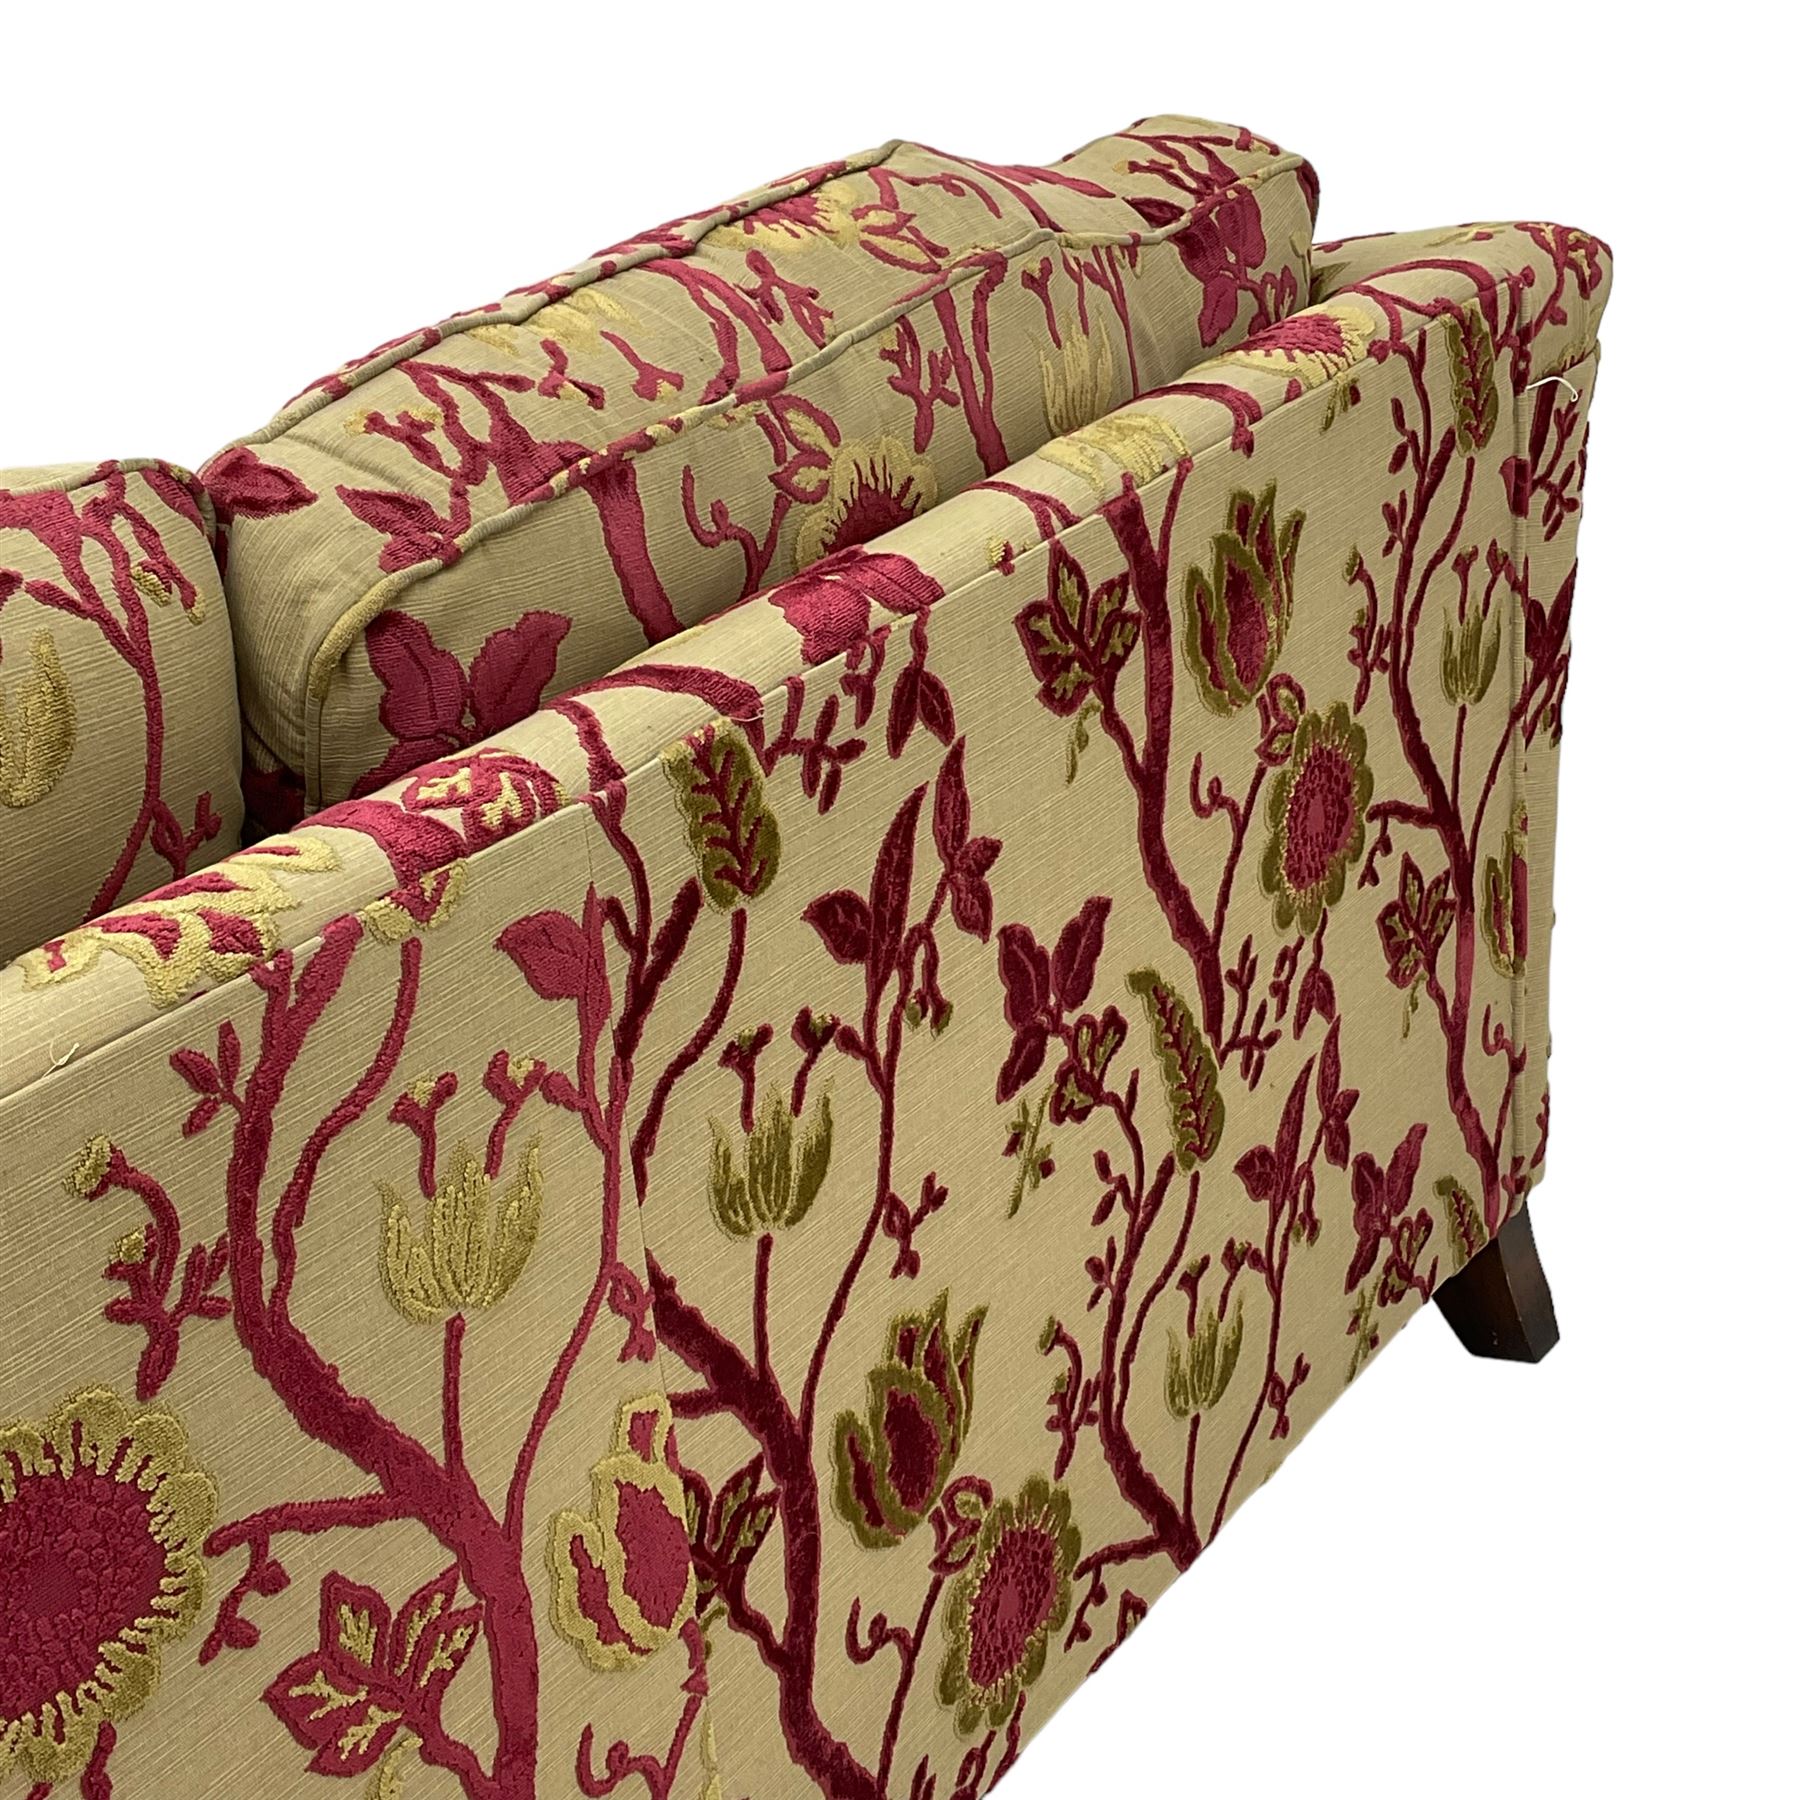 Three-piece lounge suite - large two-seat sofa upholstered in red and gold striped fabric (W185cm - Bild 12 aus 24